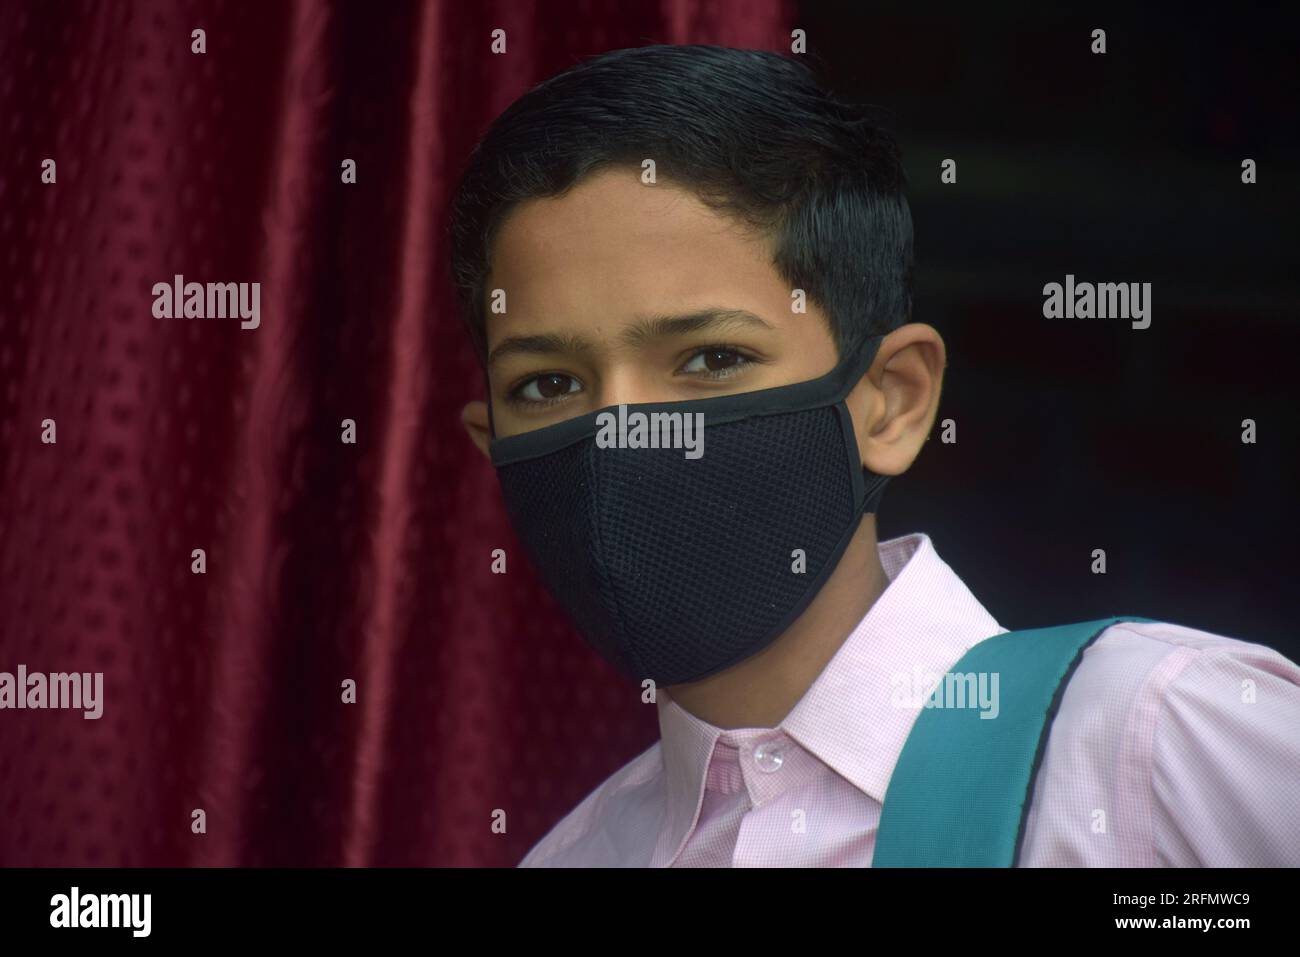 teen student boy wearing school uniform and face mask going to school with bag pack in corona virus pandemic Stock Photo